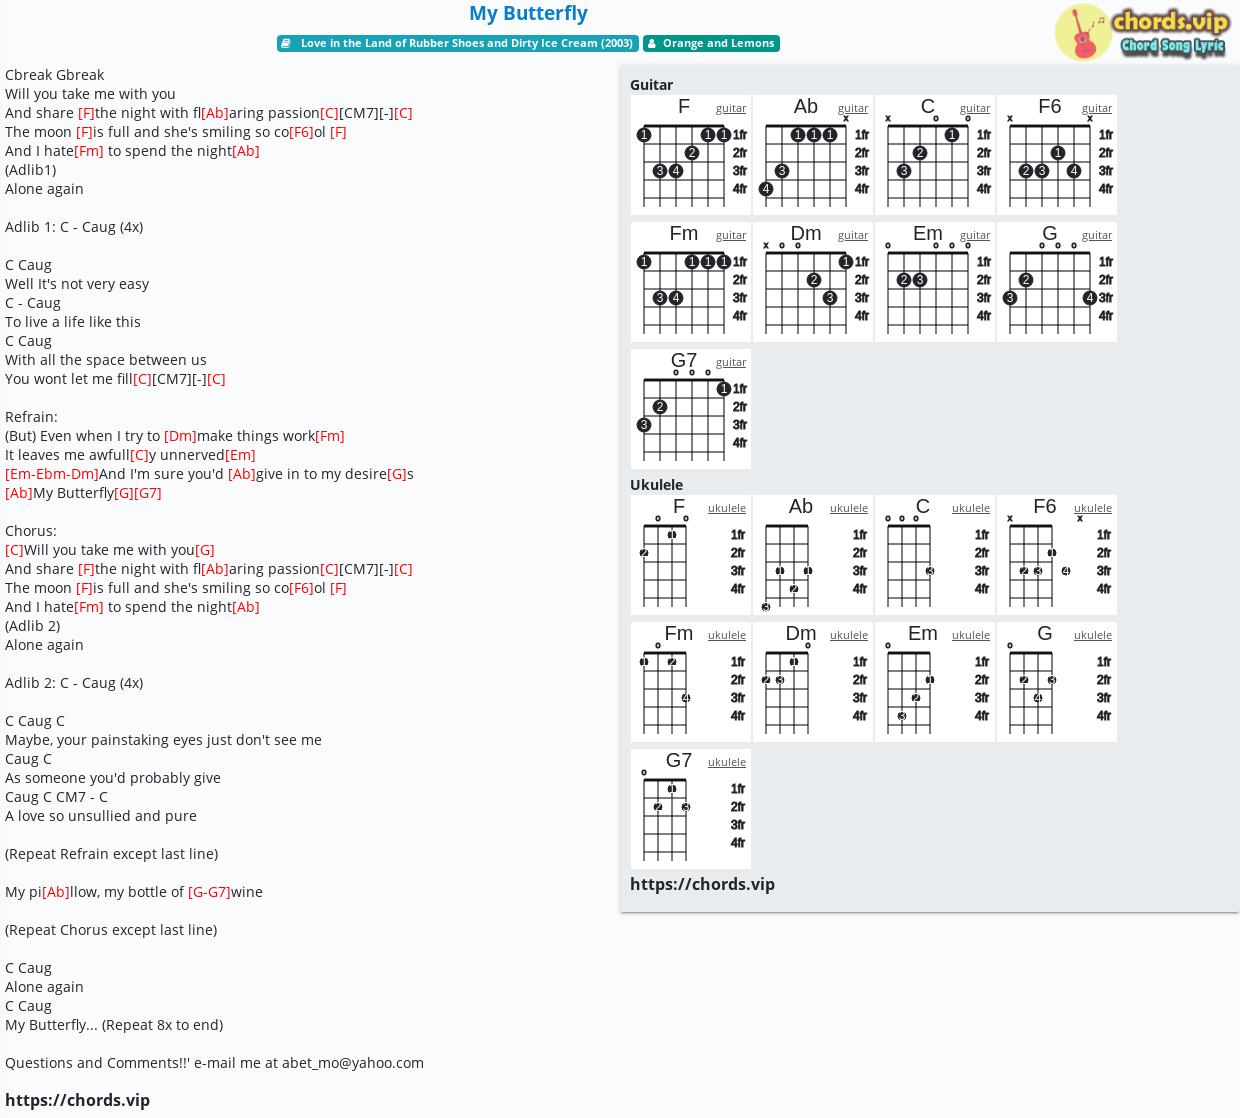 Chord: My Butterfly Orange and - tab, song lyric, sheet, guitar, | chords.vip